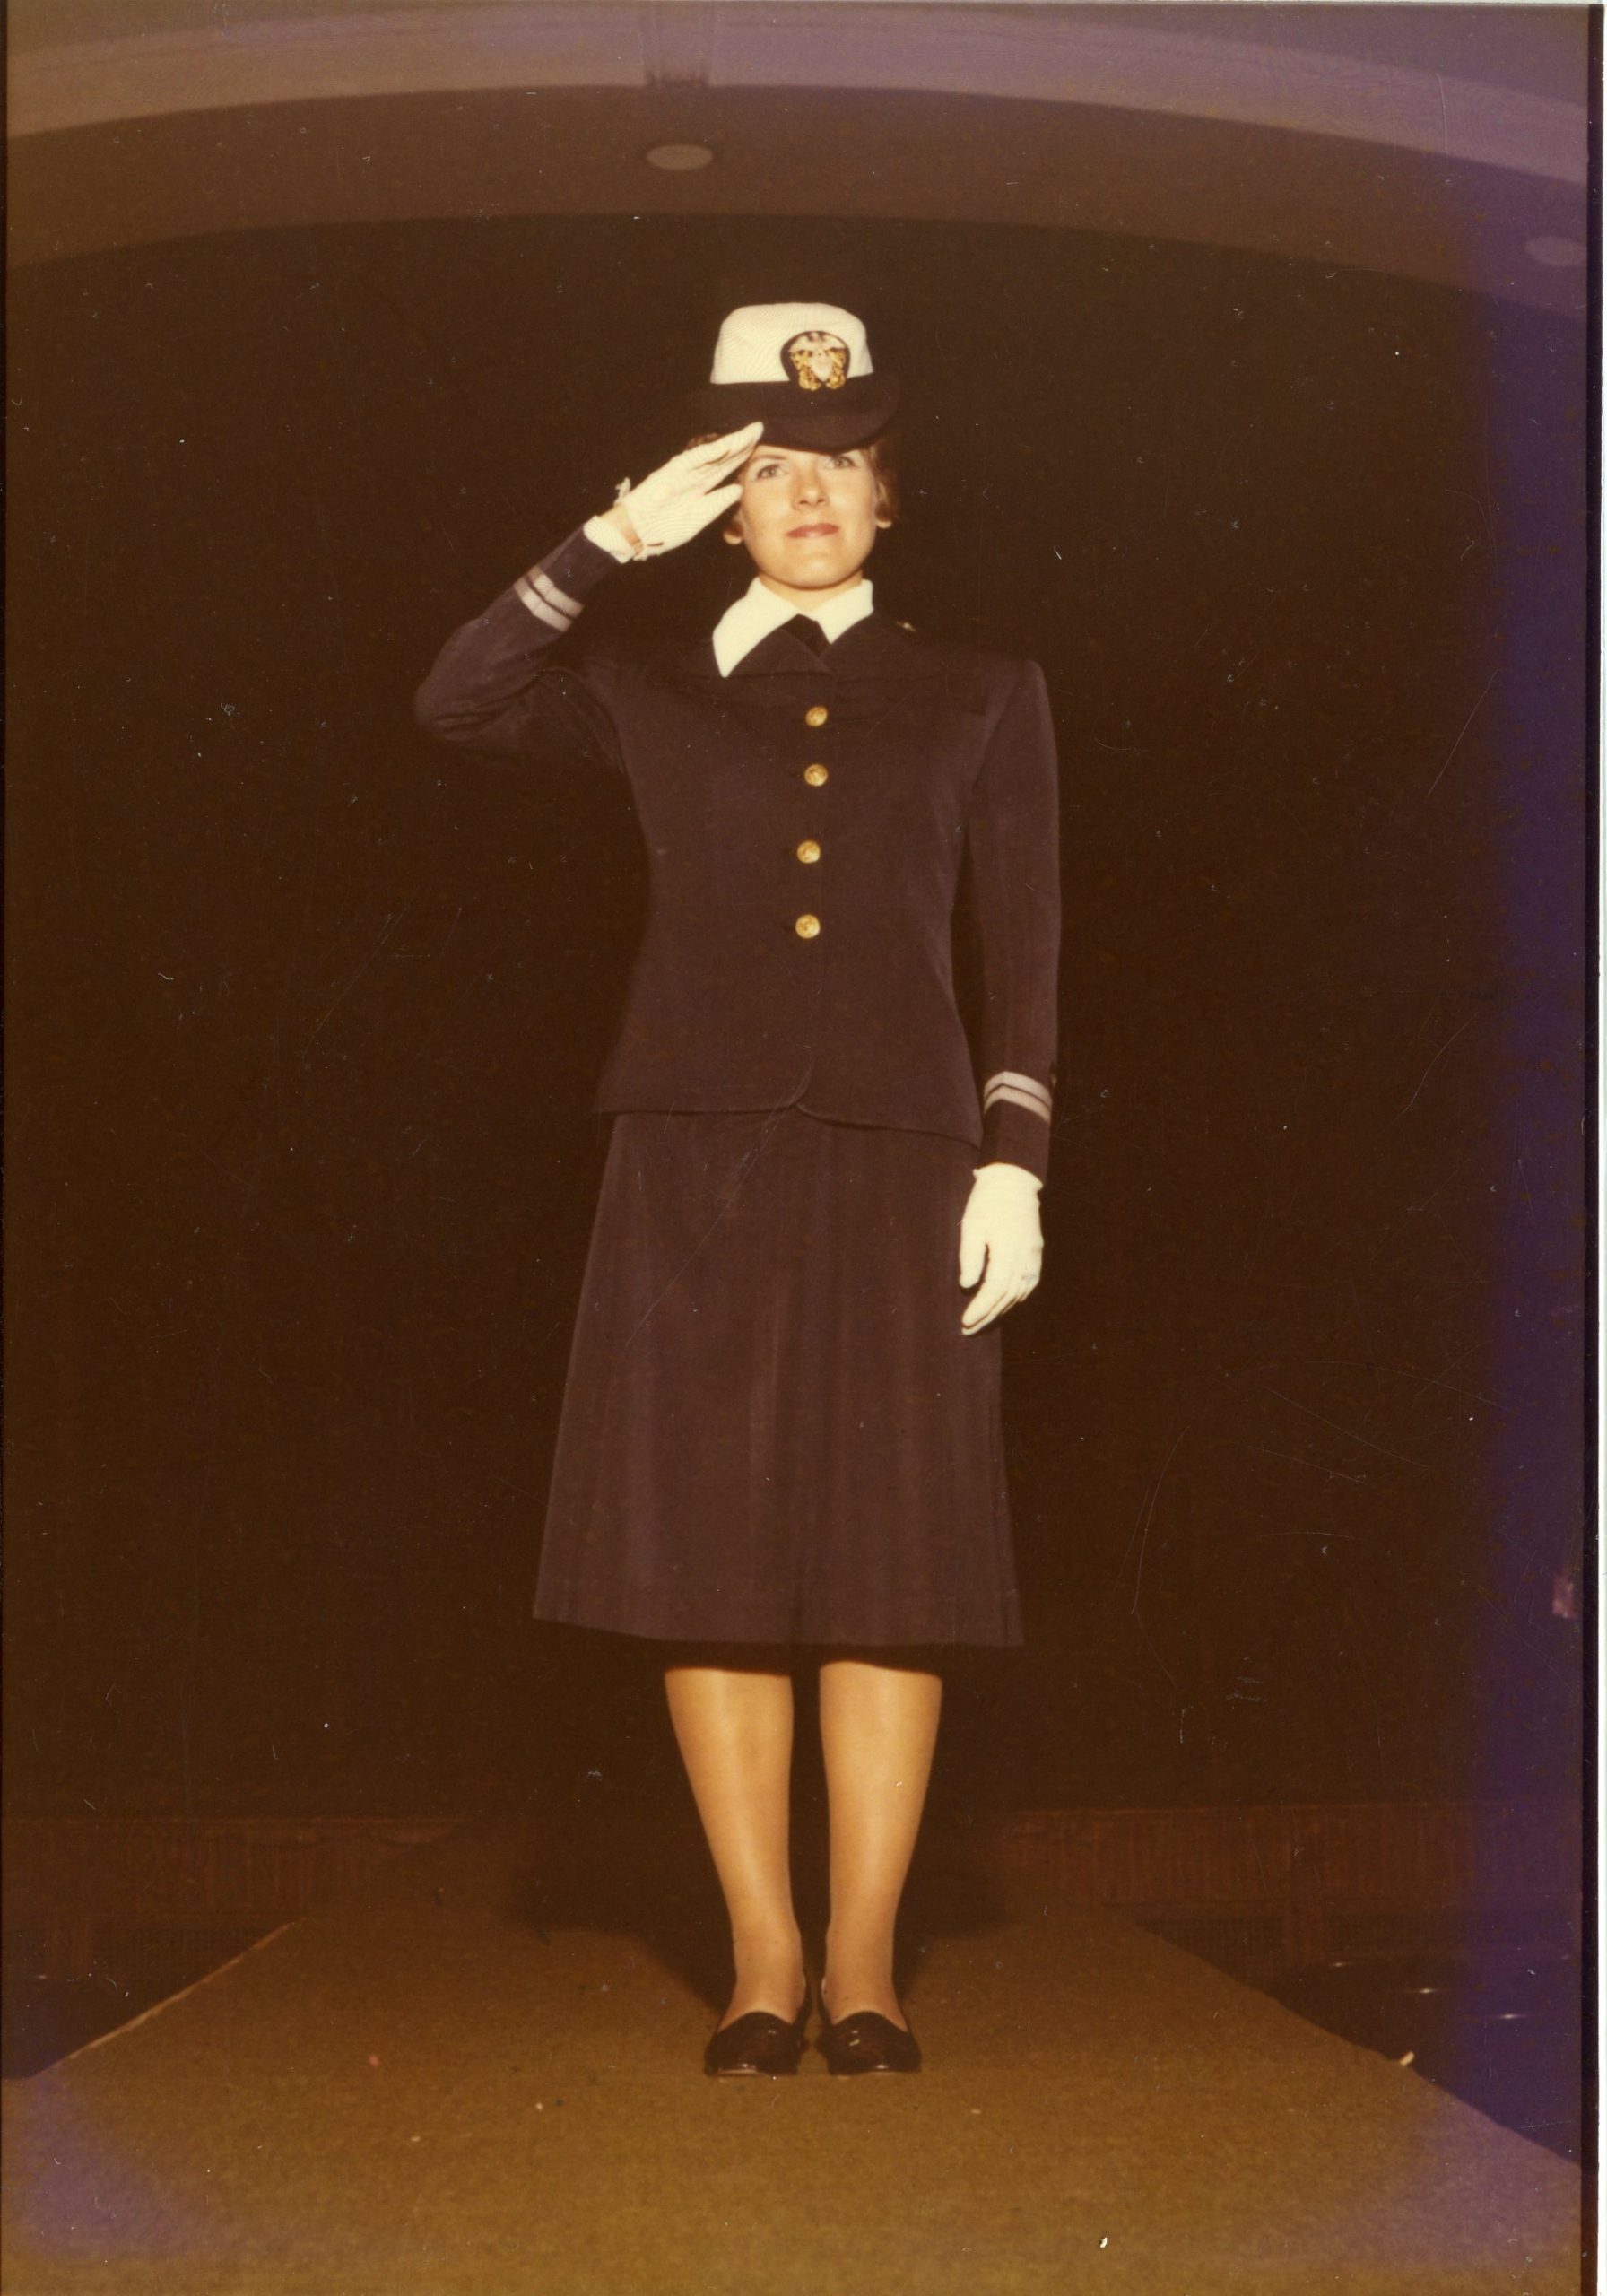 Phyllis Lainson in her naval uniform. Courtesy of Adams County Historical Society.